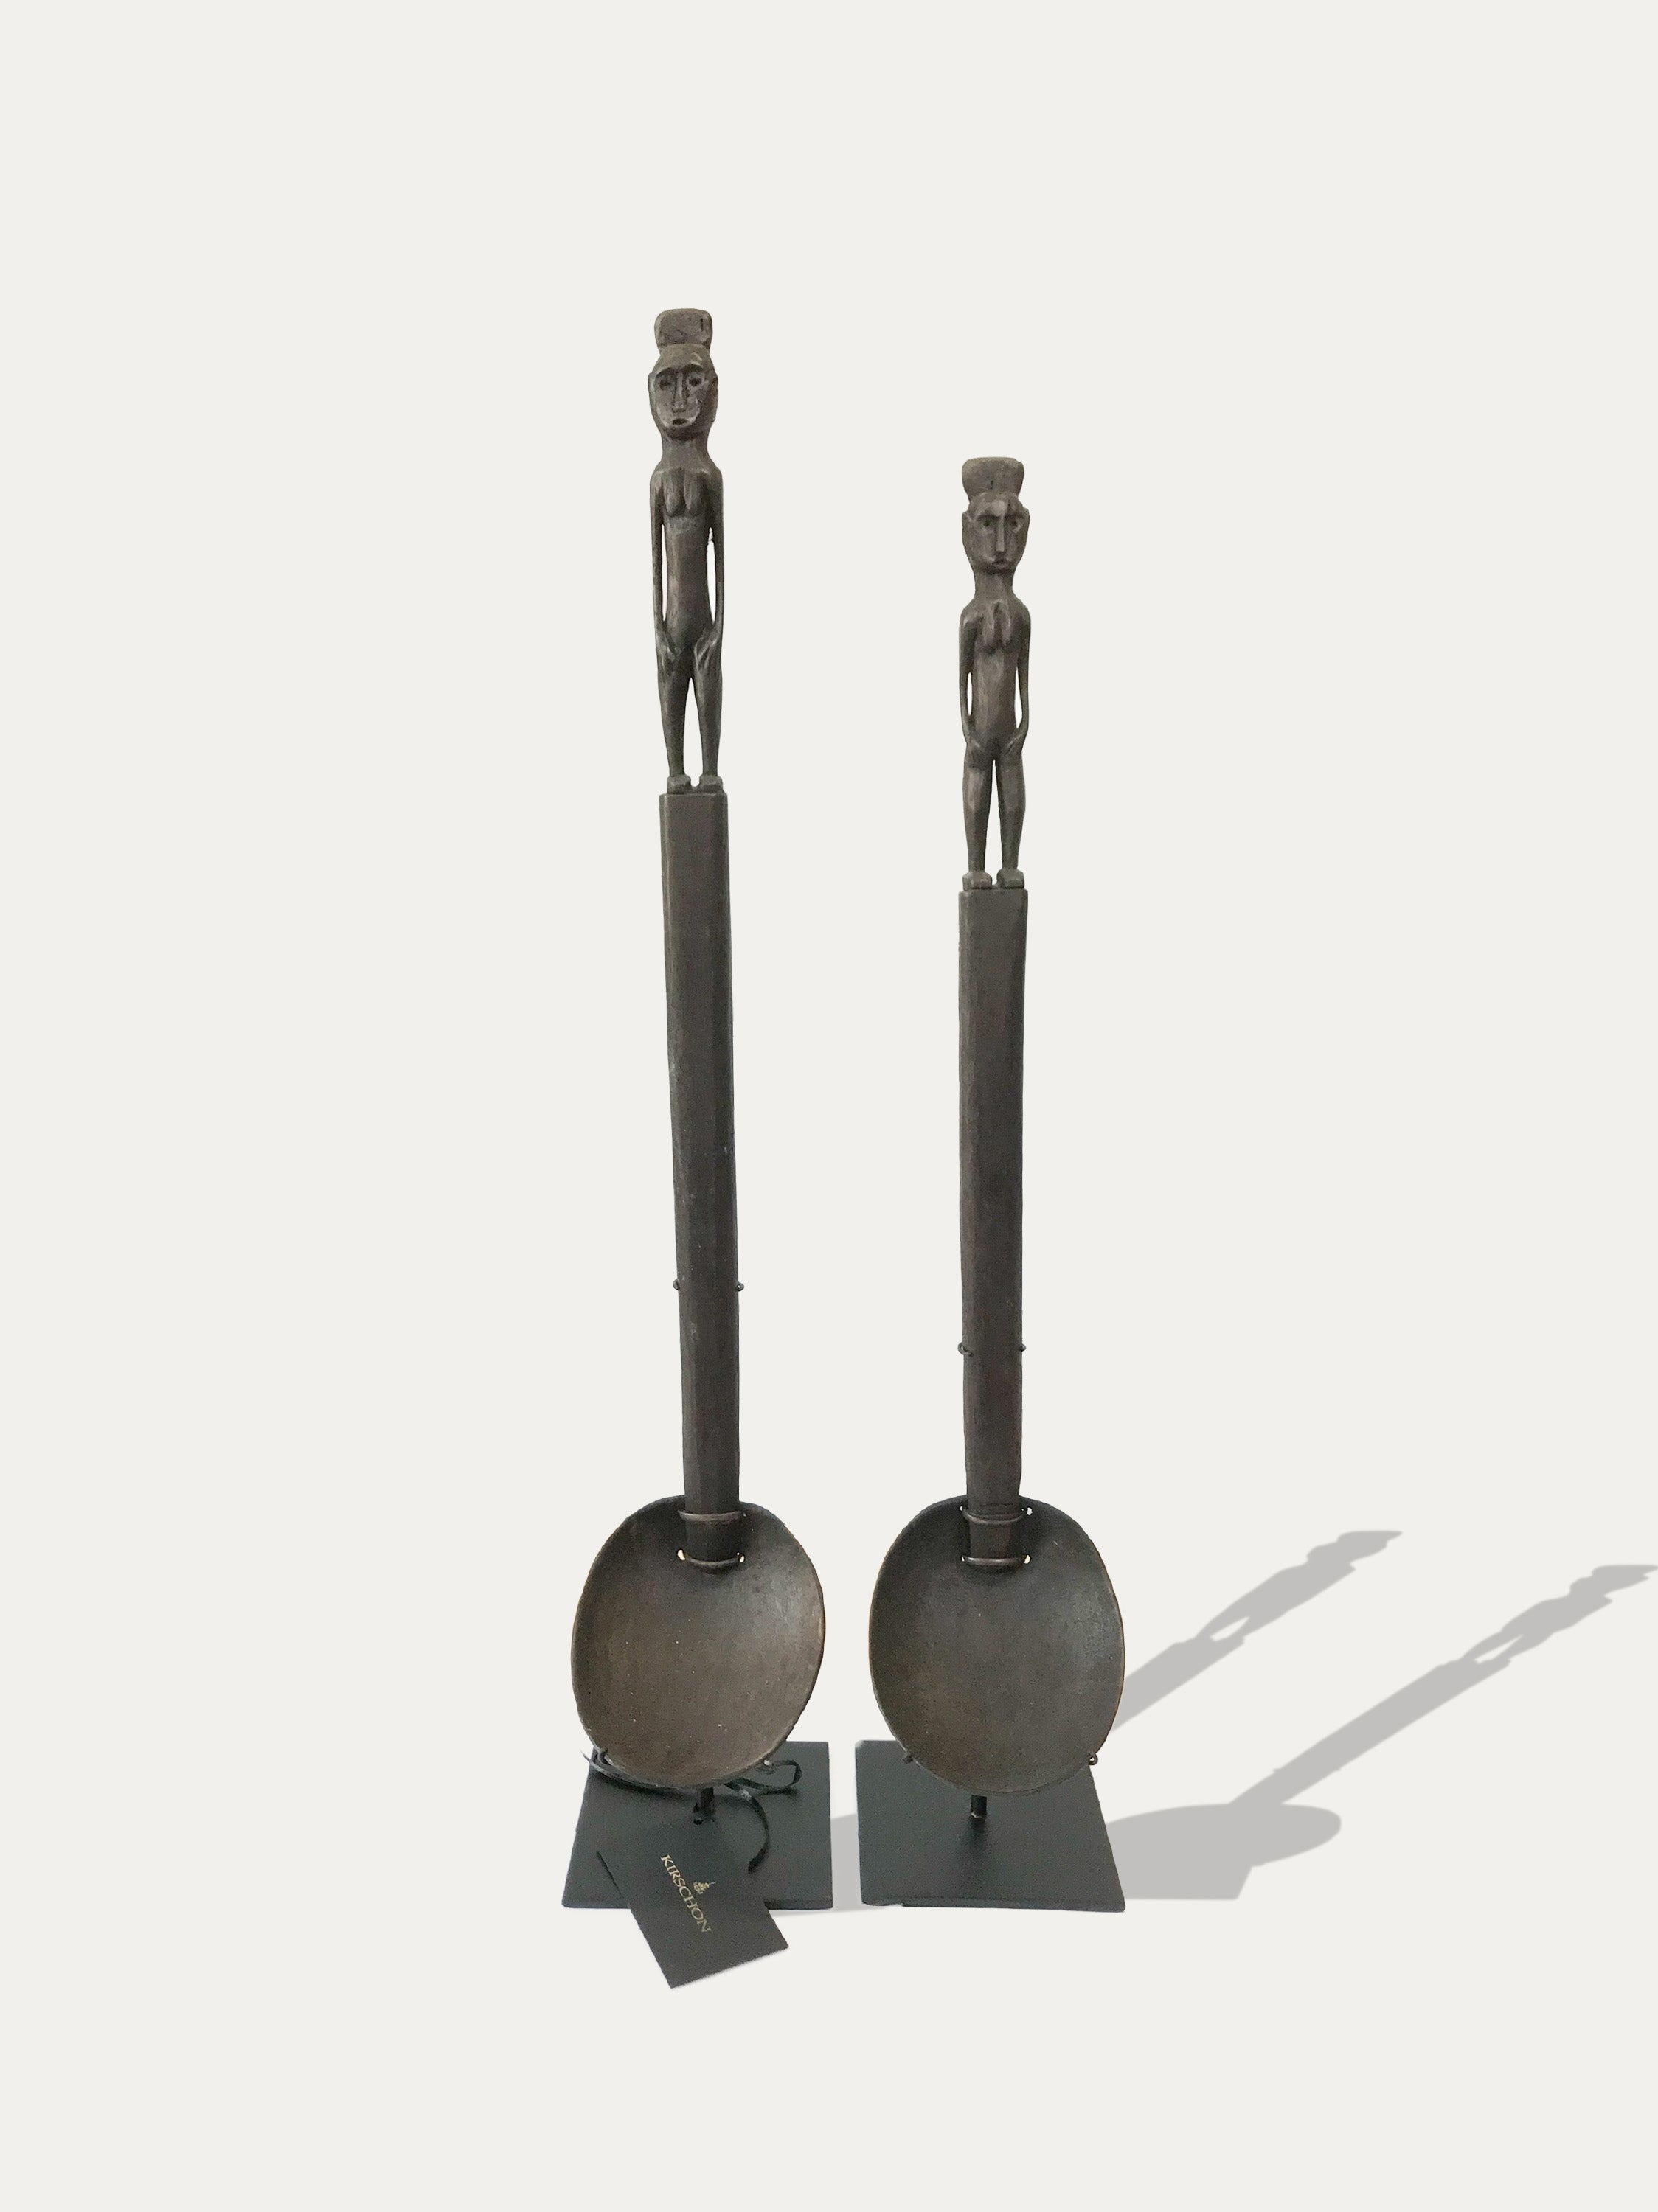 Set of 2 ceremonial Ladle spoons from Sumba